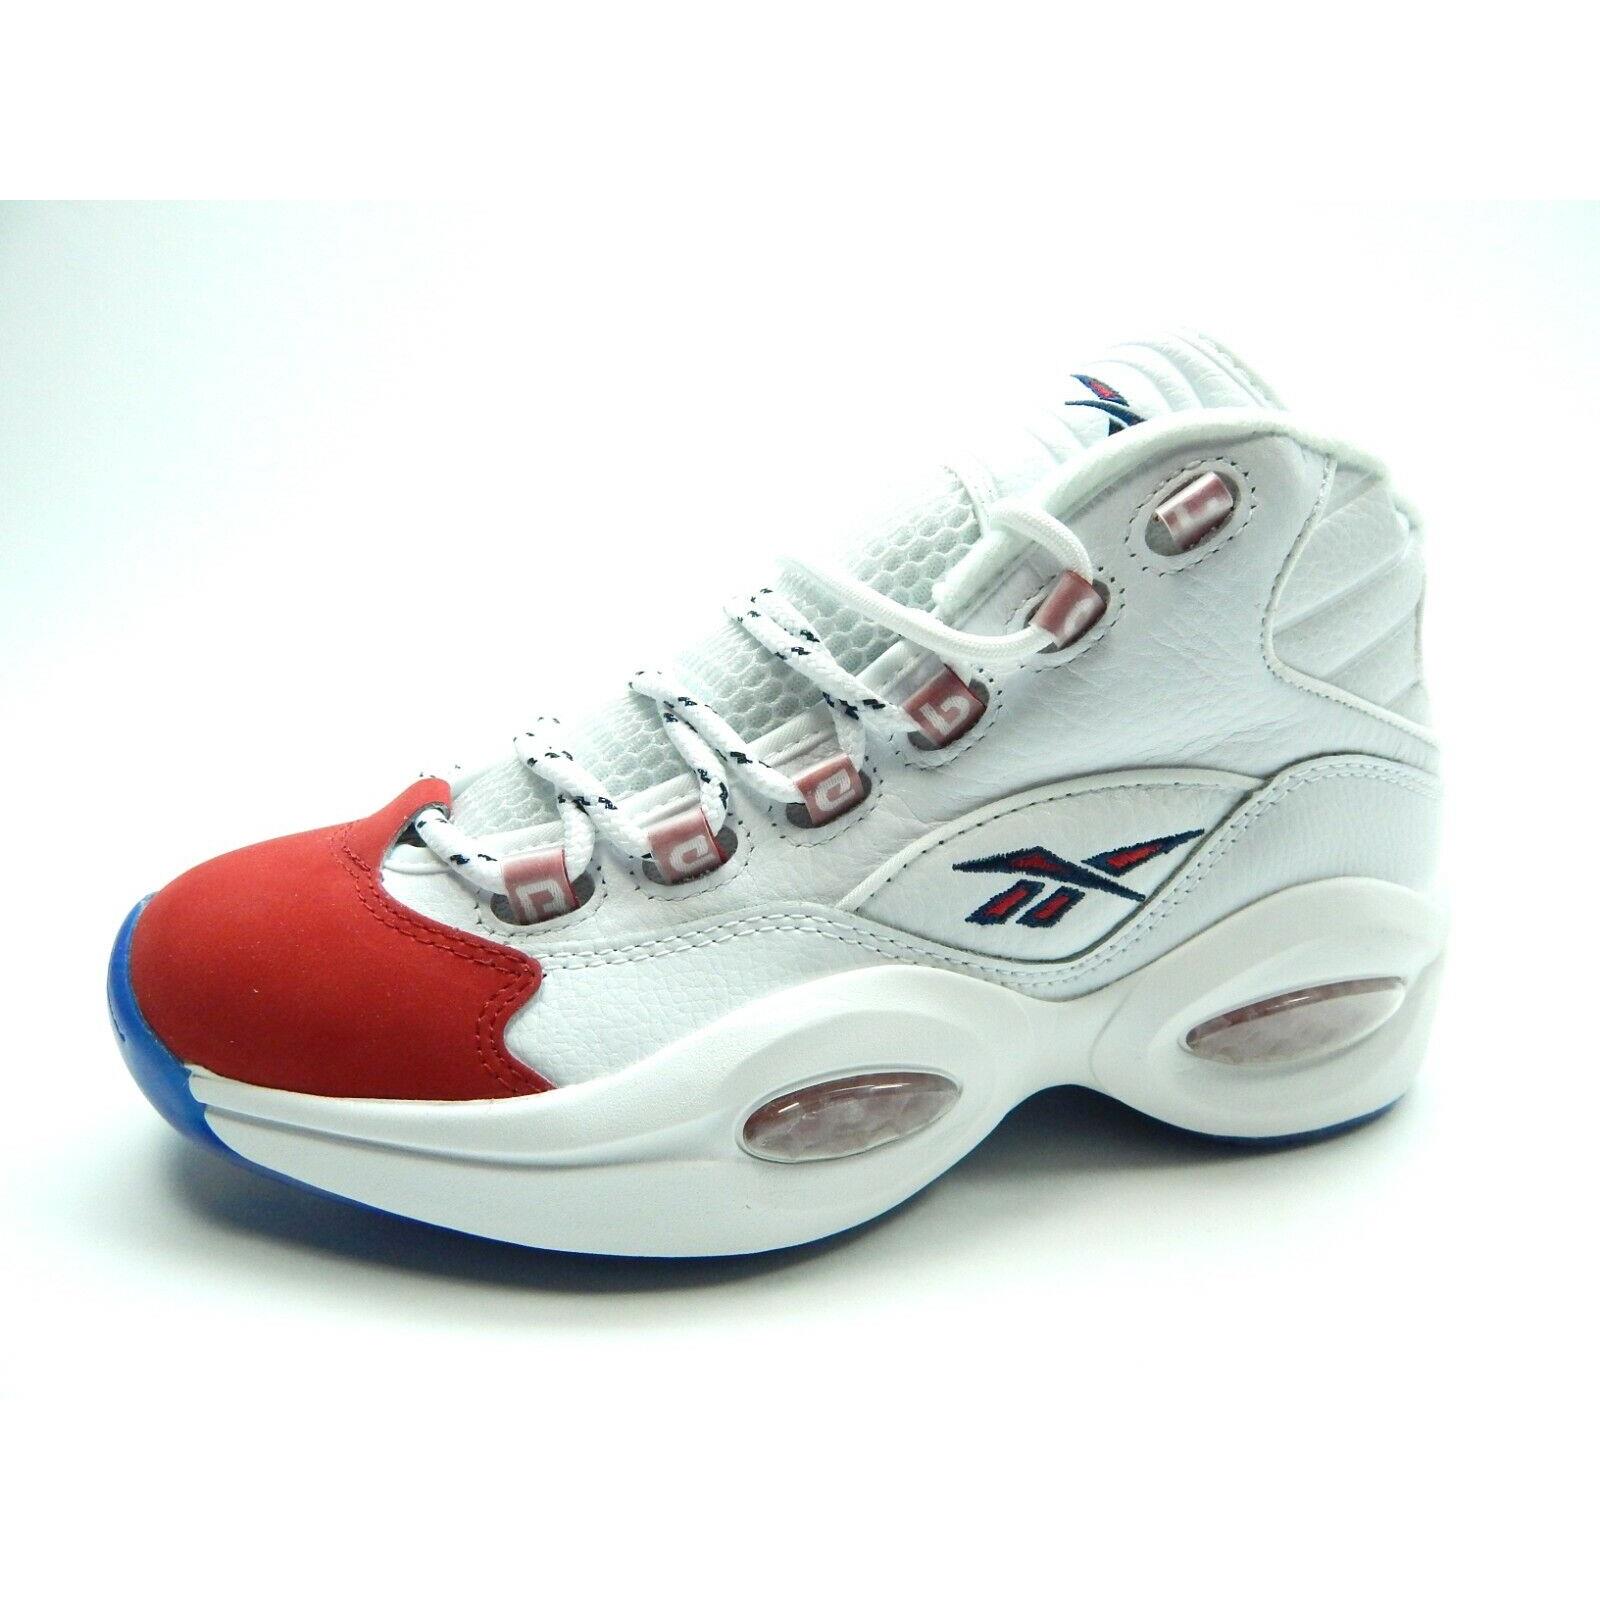 Reebok Question Mid Basketball White Red Blue FY1018 Men Shoes Size 7